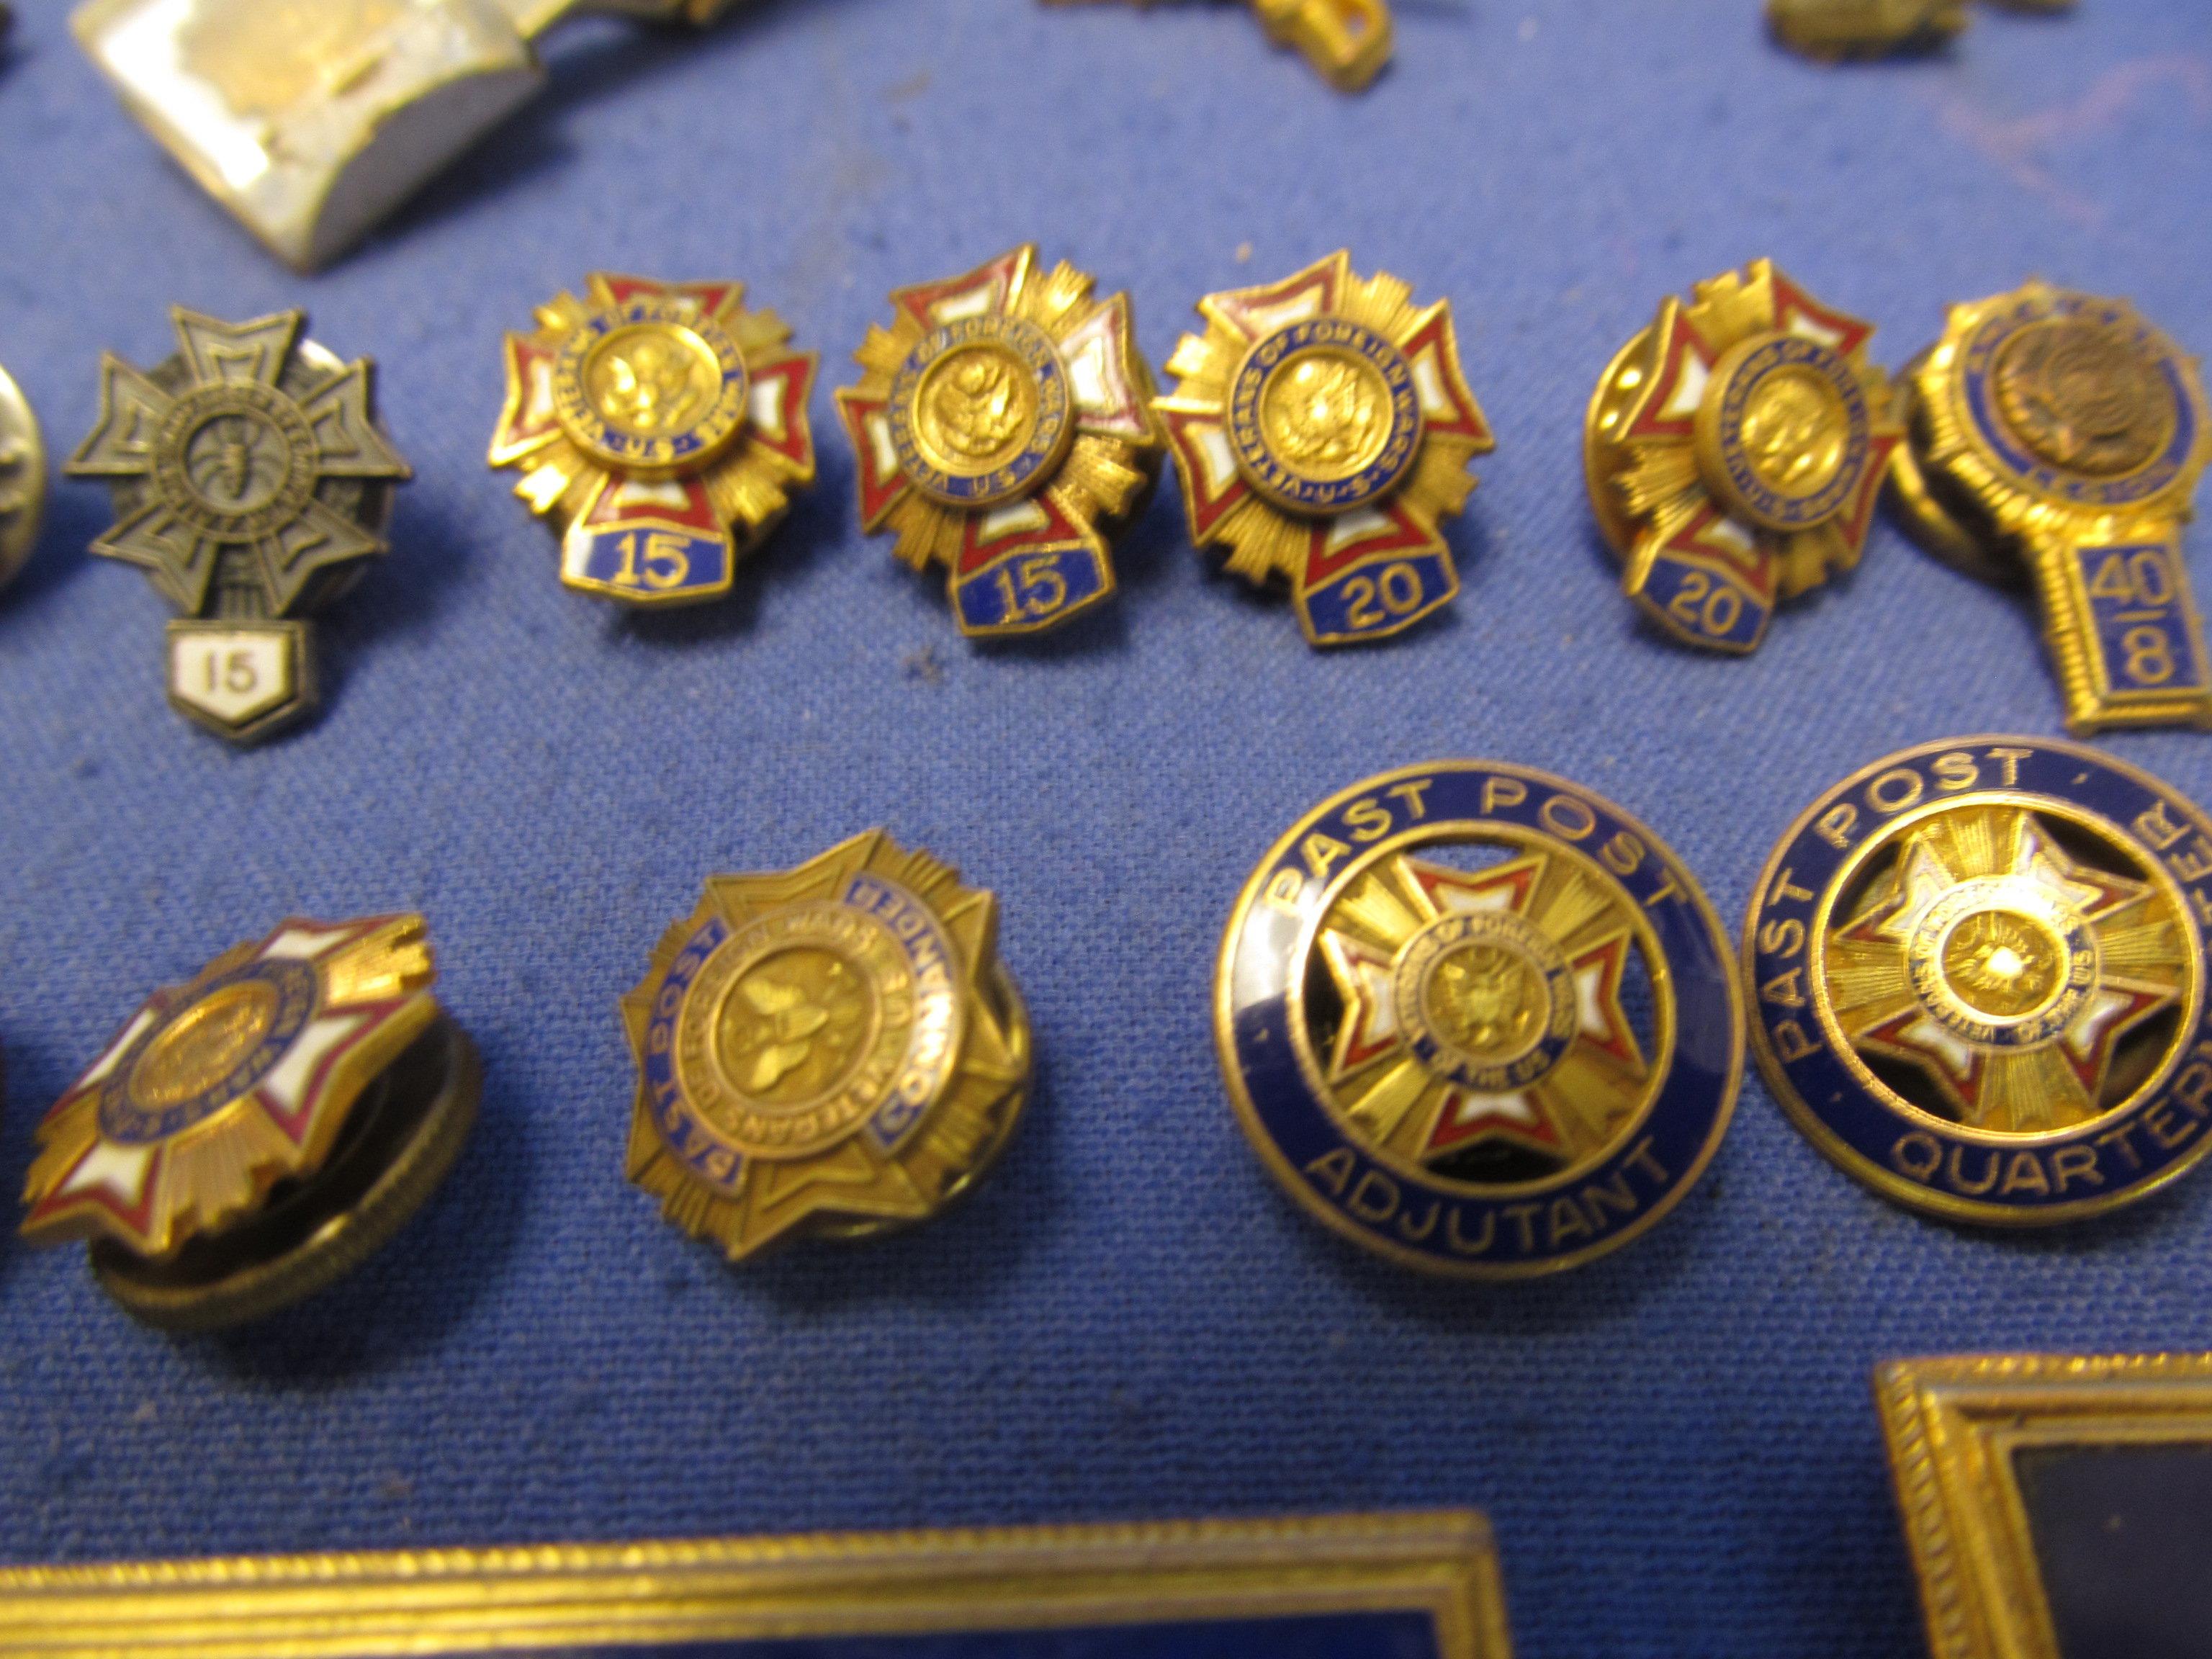 PINS!! 17 Military, 9 Other, 38 VFW & 3 Cuff links, 1 Button, & Tie Tack